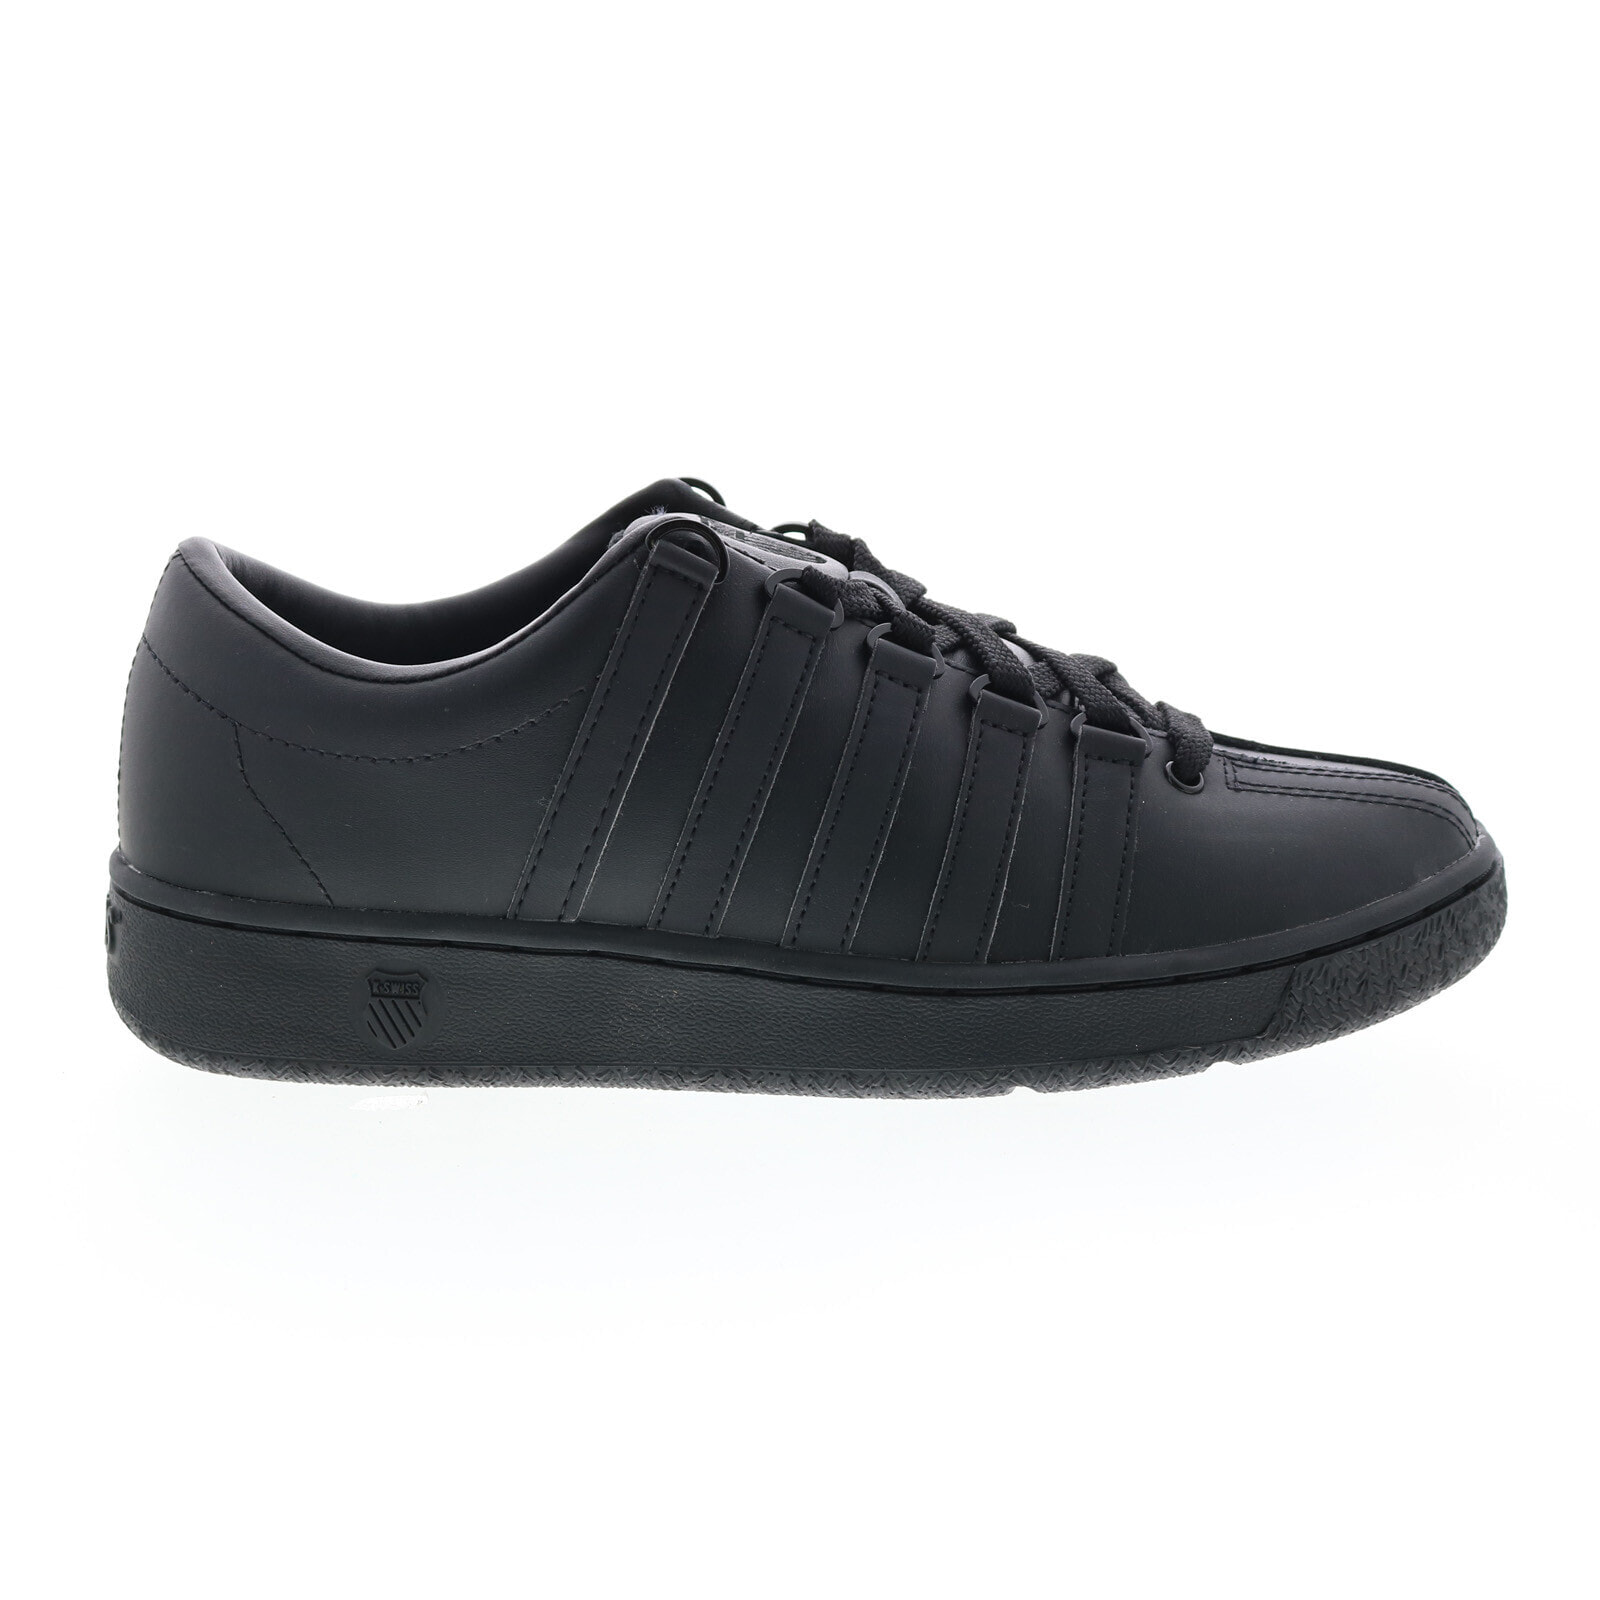 K-Swiss Classic 2000 06506-001-M Mens Black Lifestyle Sneakers Shoes